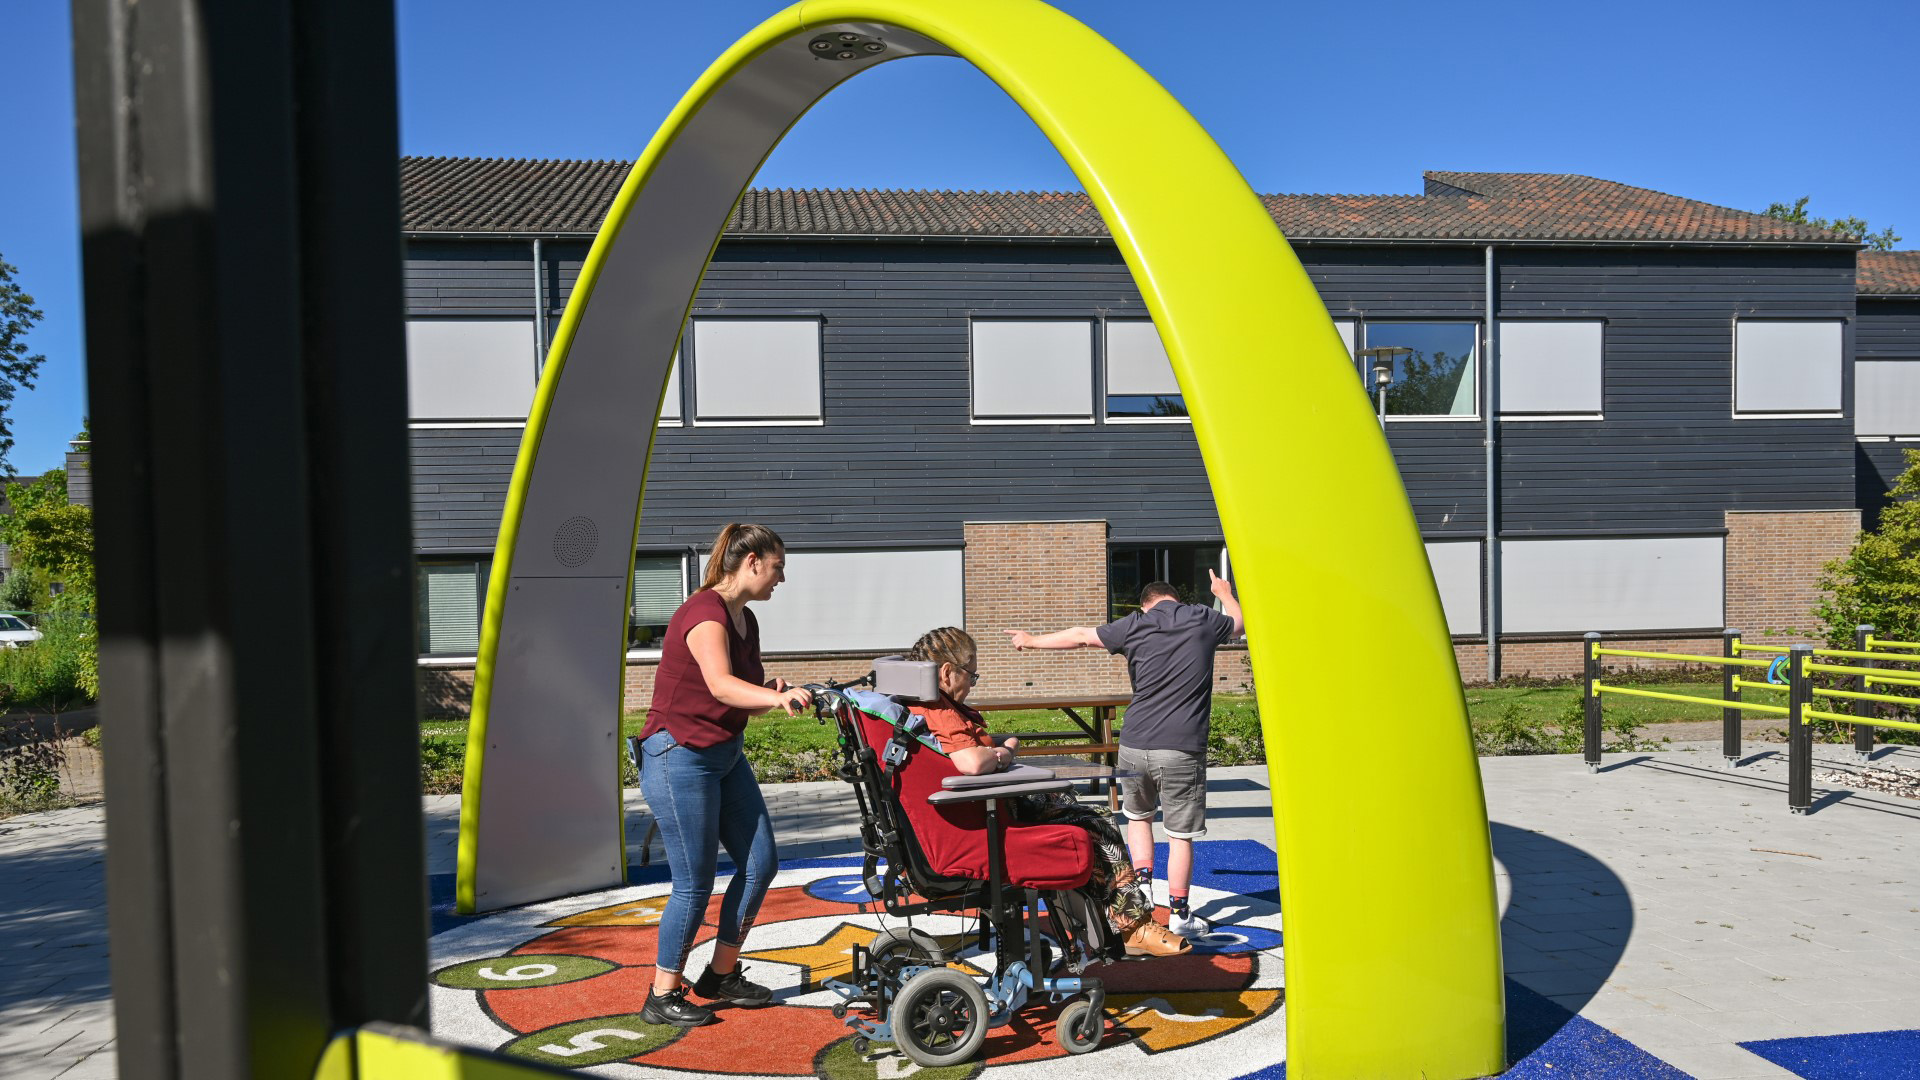 Residents and caregiver from Ipse de Bruggen playing together under the Lappset Sona Interactive dance and play arch